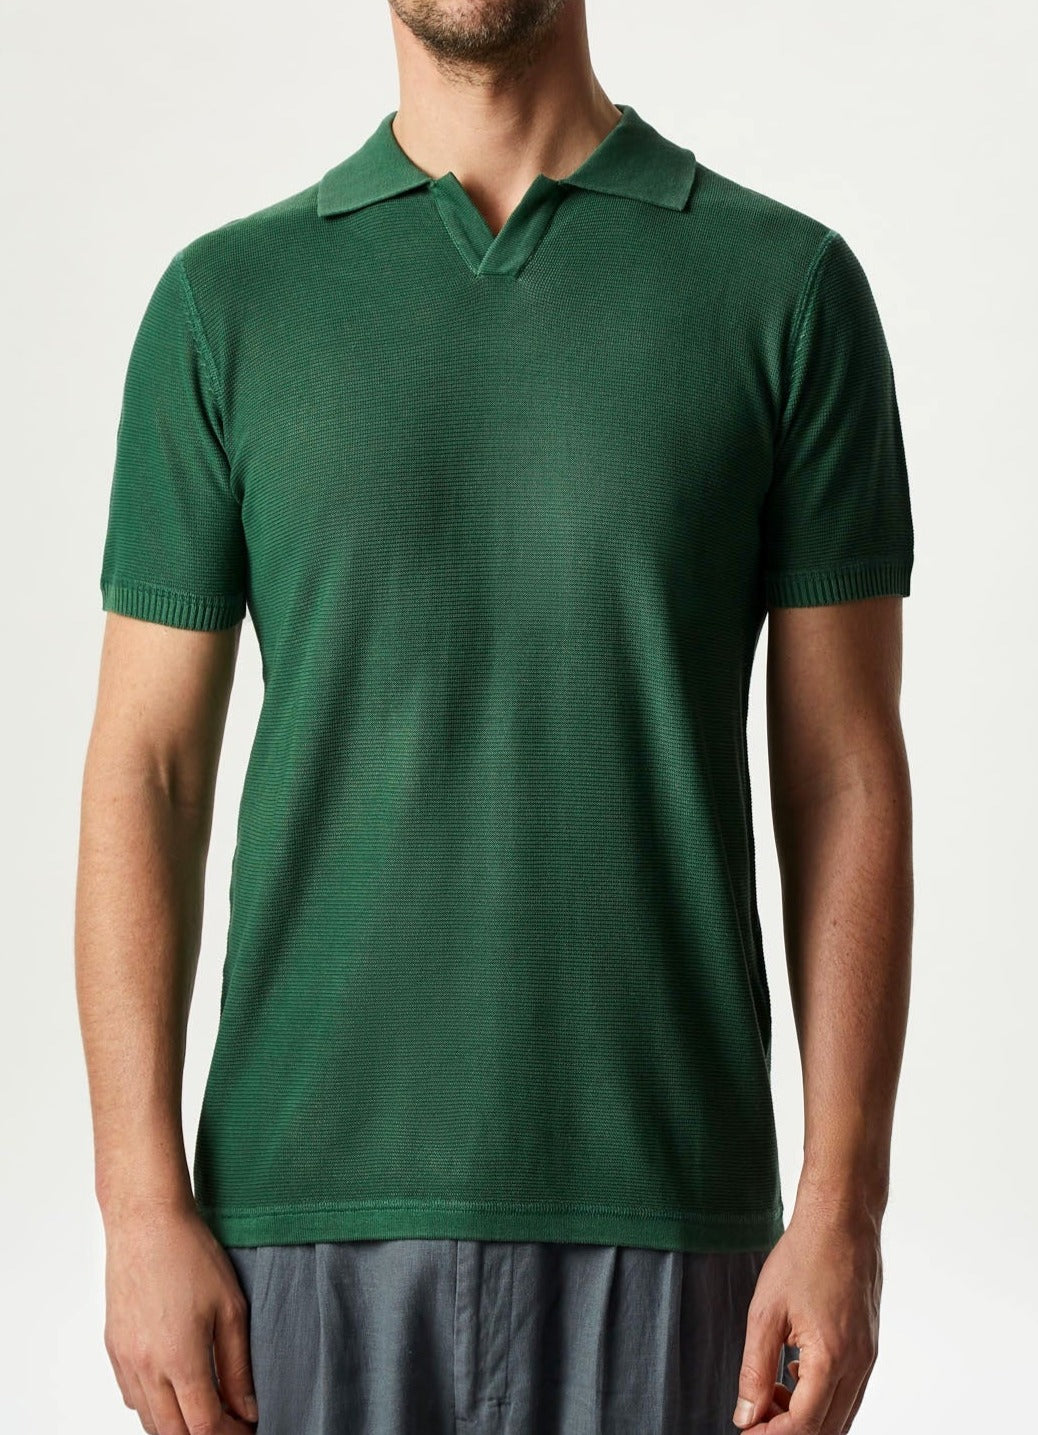 Men Polo | Green Delave Polo Shirt With Short Sleeve by Spanish designer Adolfo Dominguez